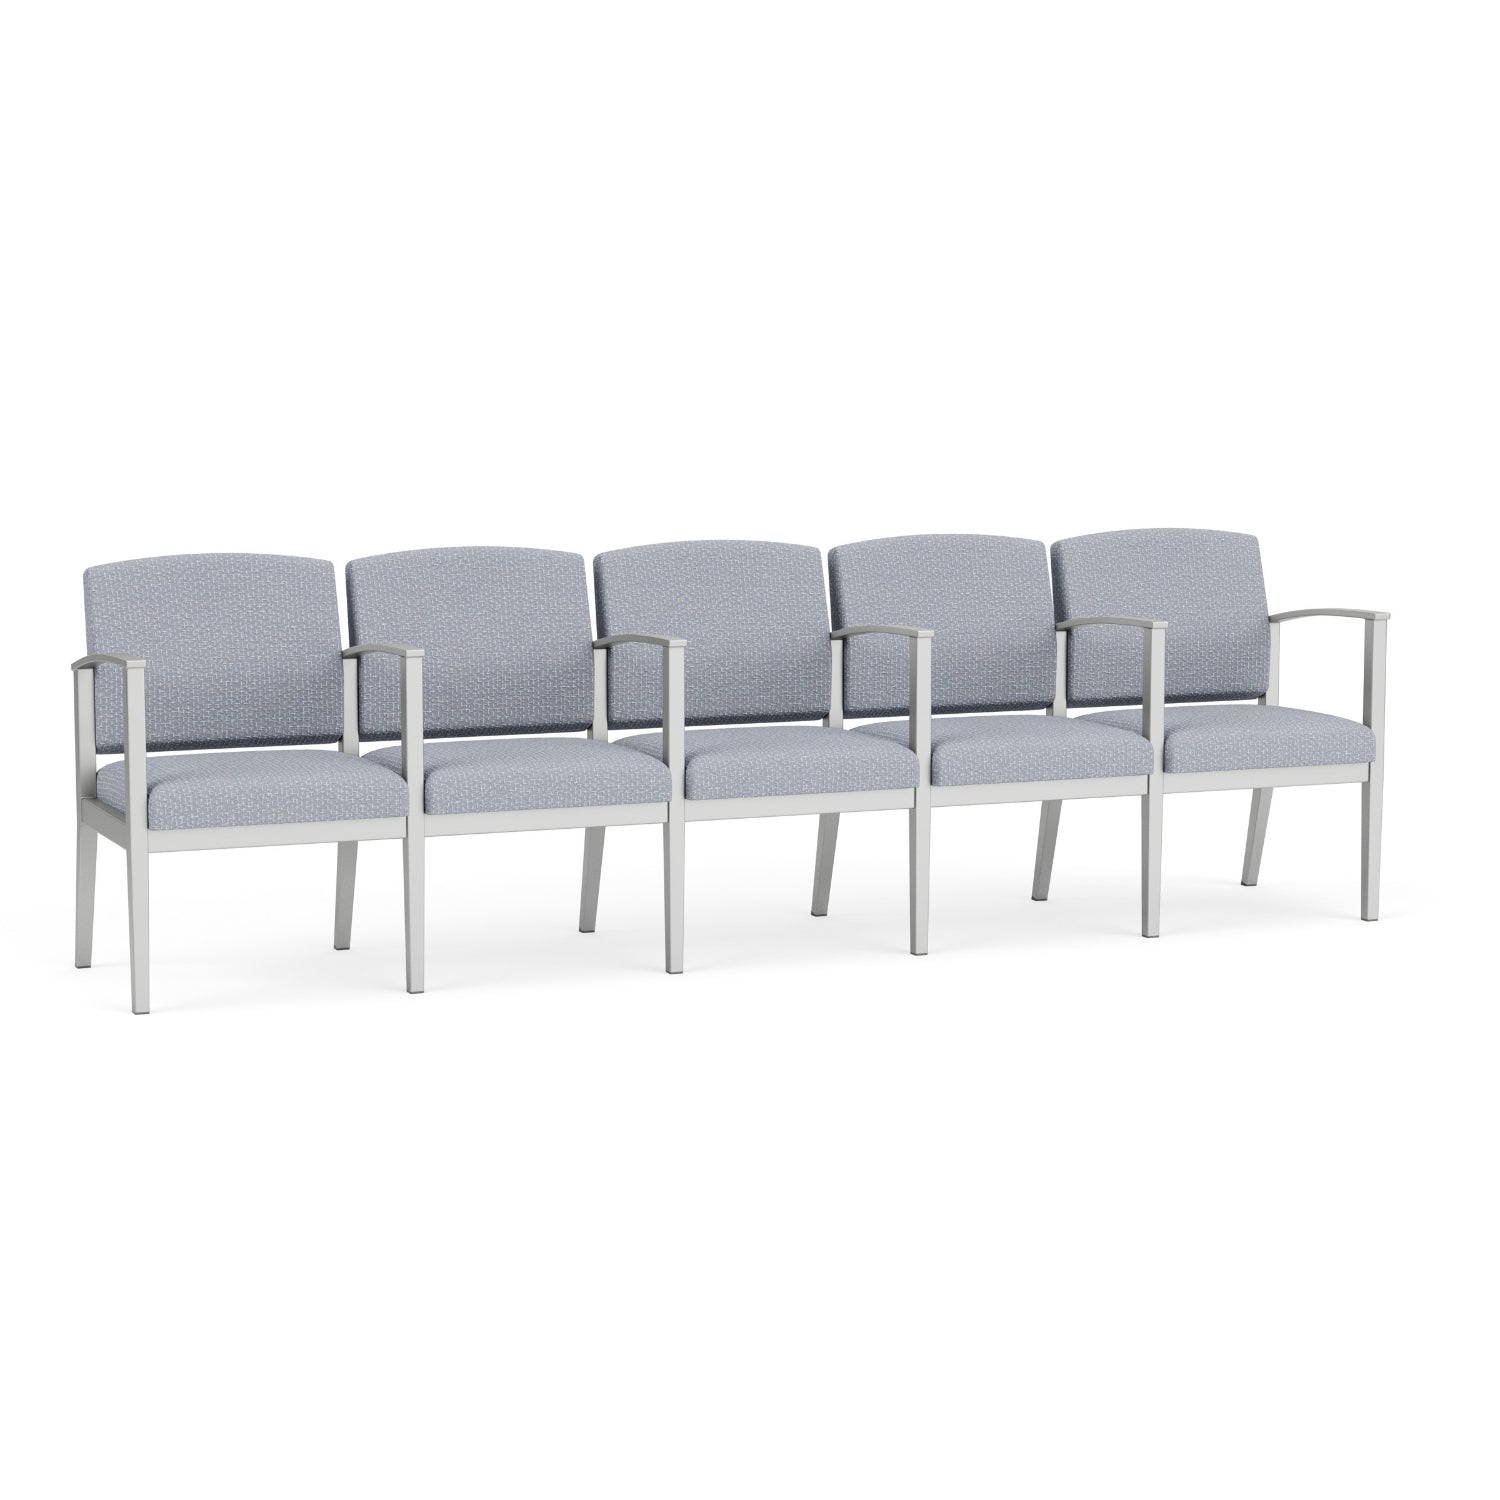 Amherst Steel Collection Reception Seating, 5 Seats with Center Arms, Designer Fabric Upholstery, FREE SHIPPING